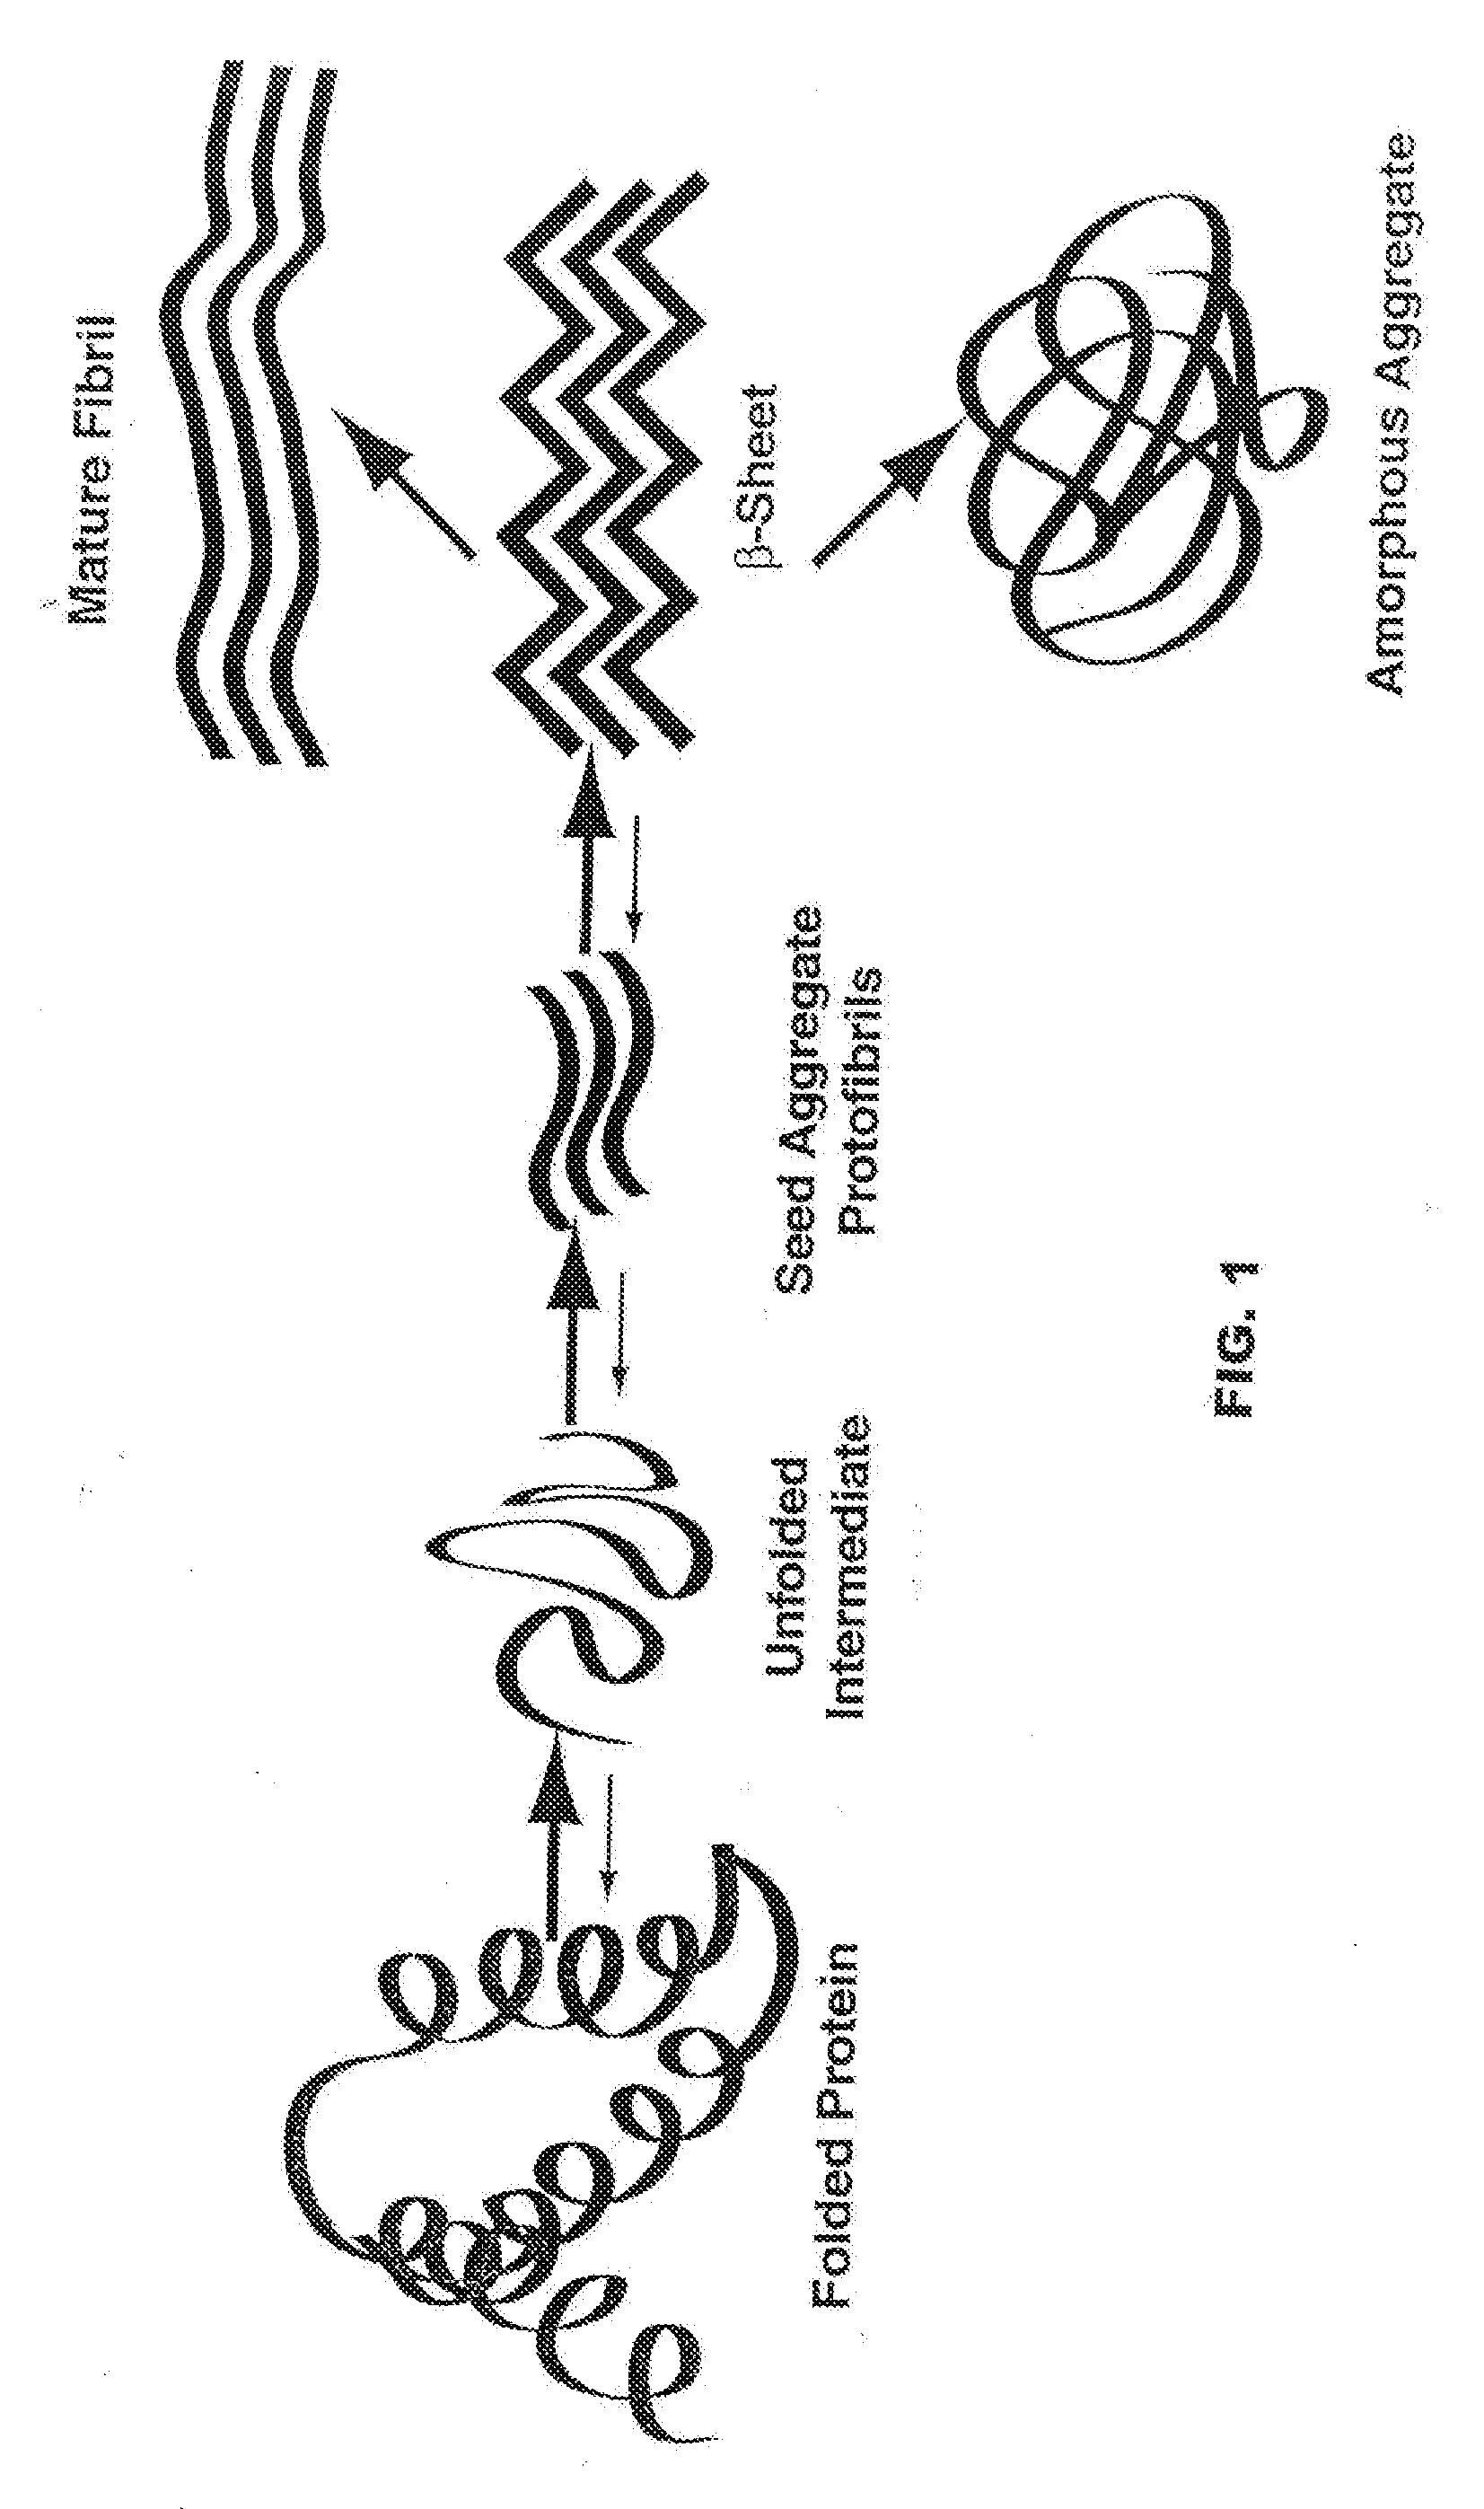 Neurodegenerative protein aggregation inhibition methods and compounds